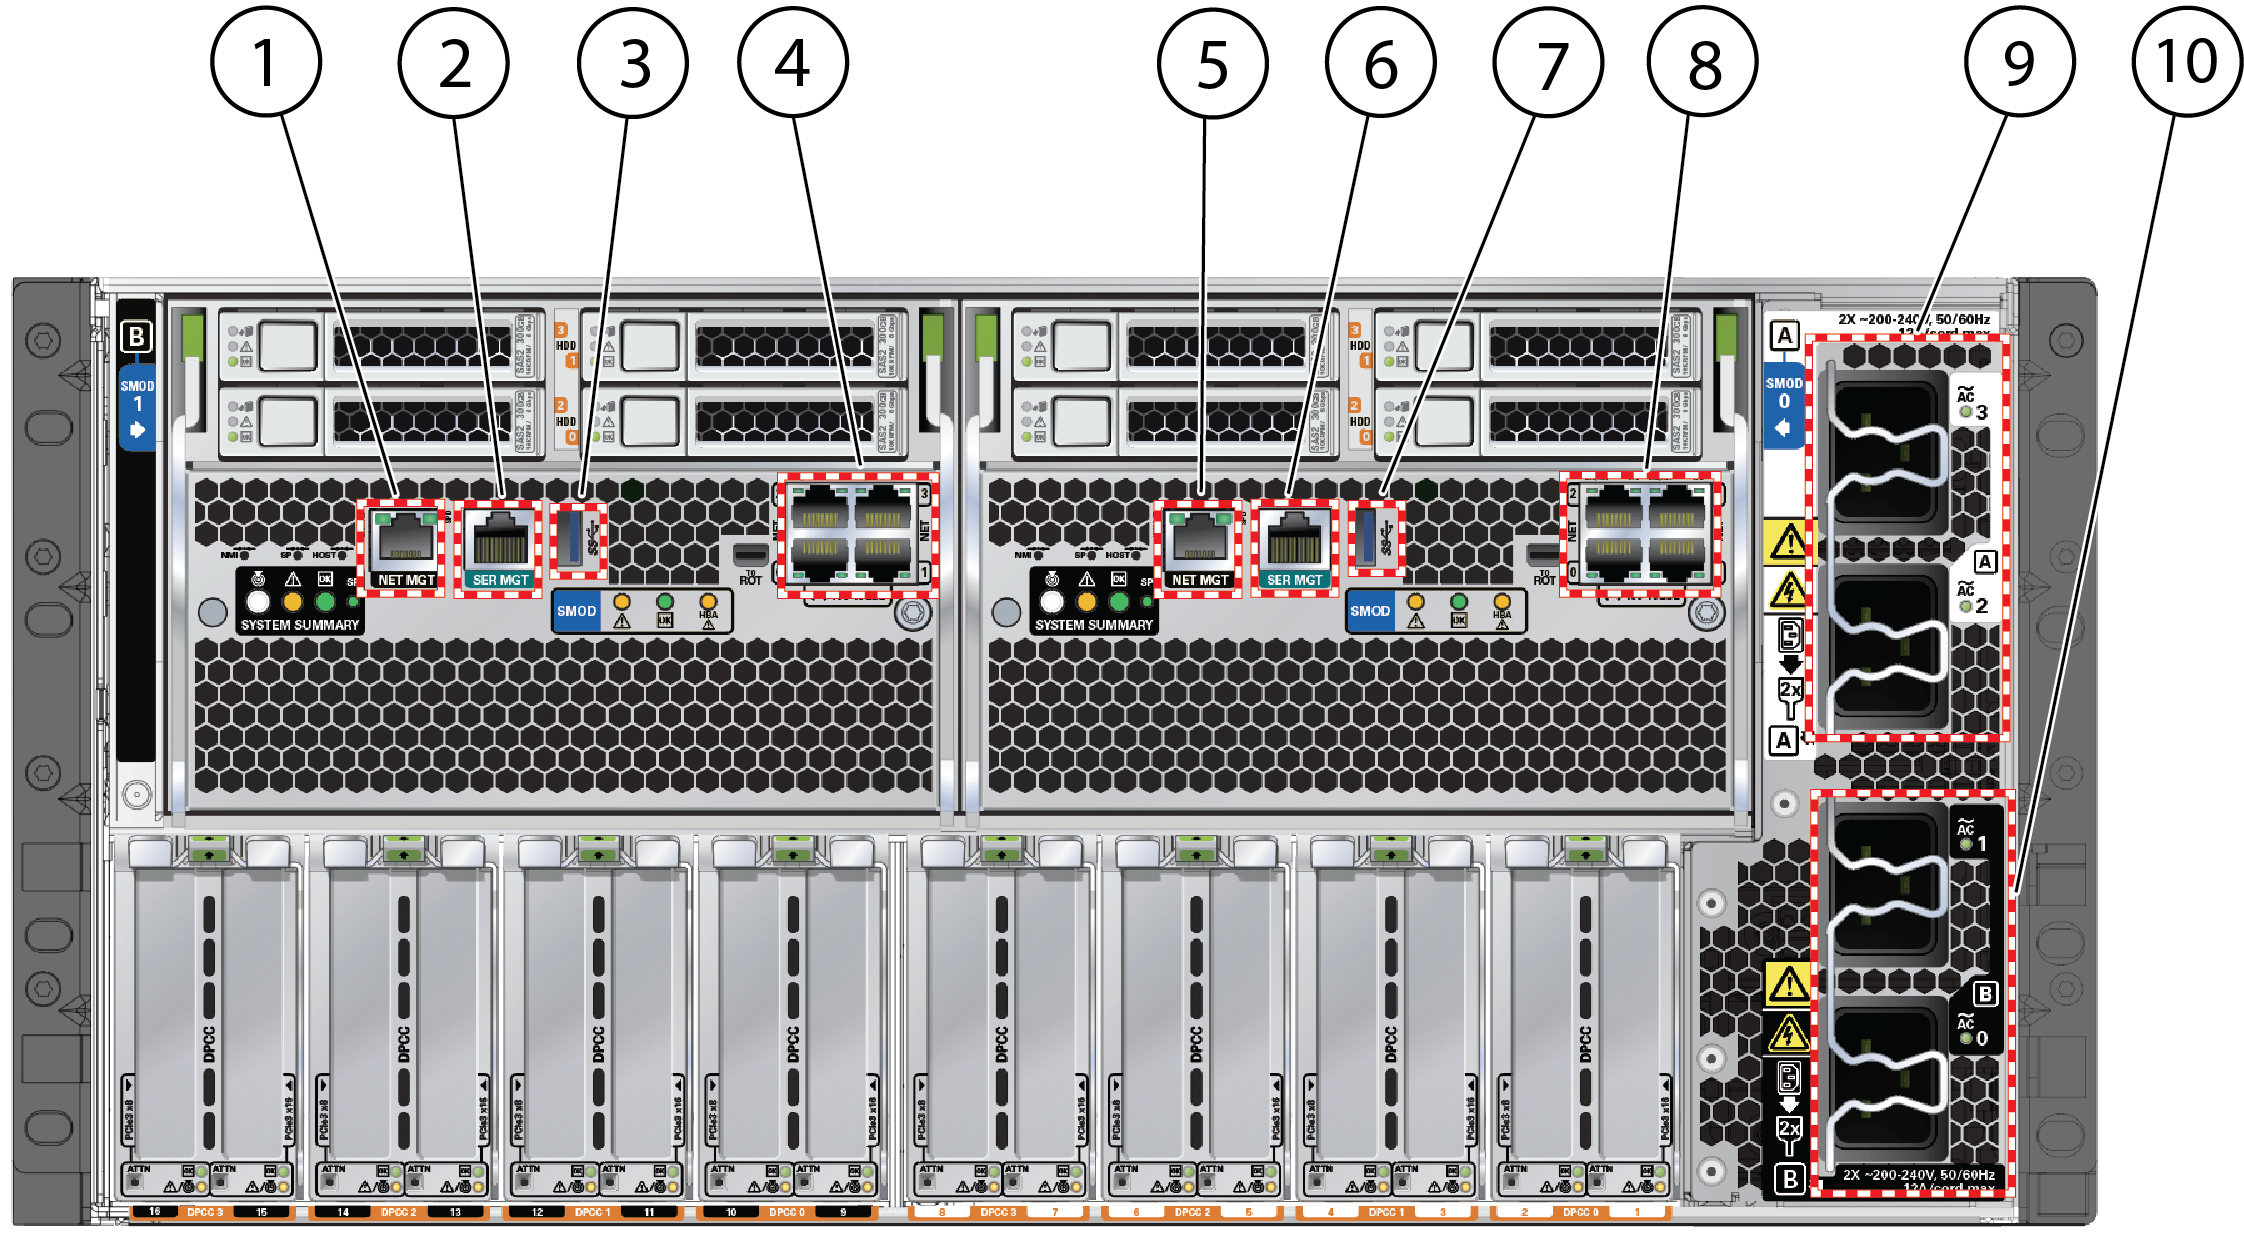 Figure of back panel connectors and ports.